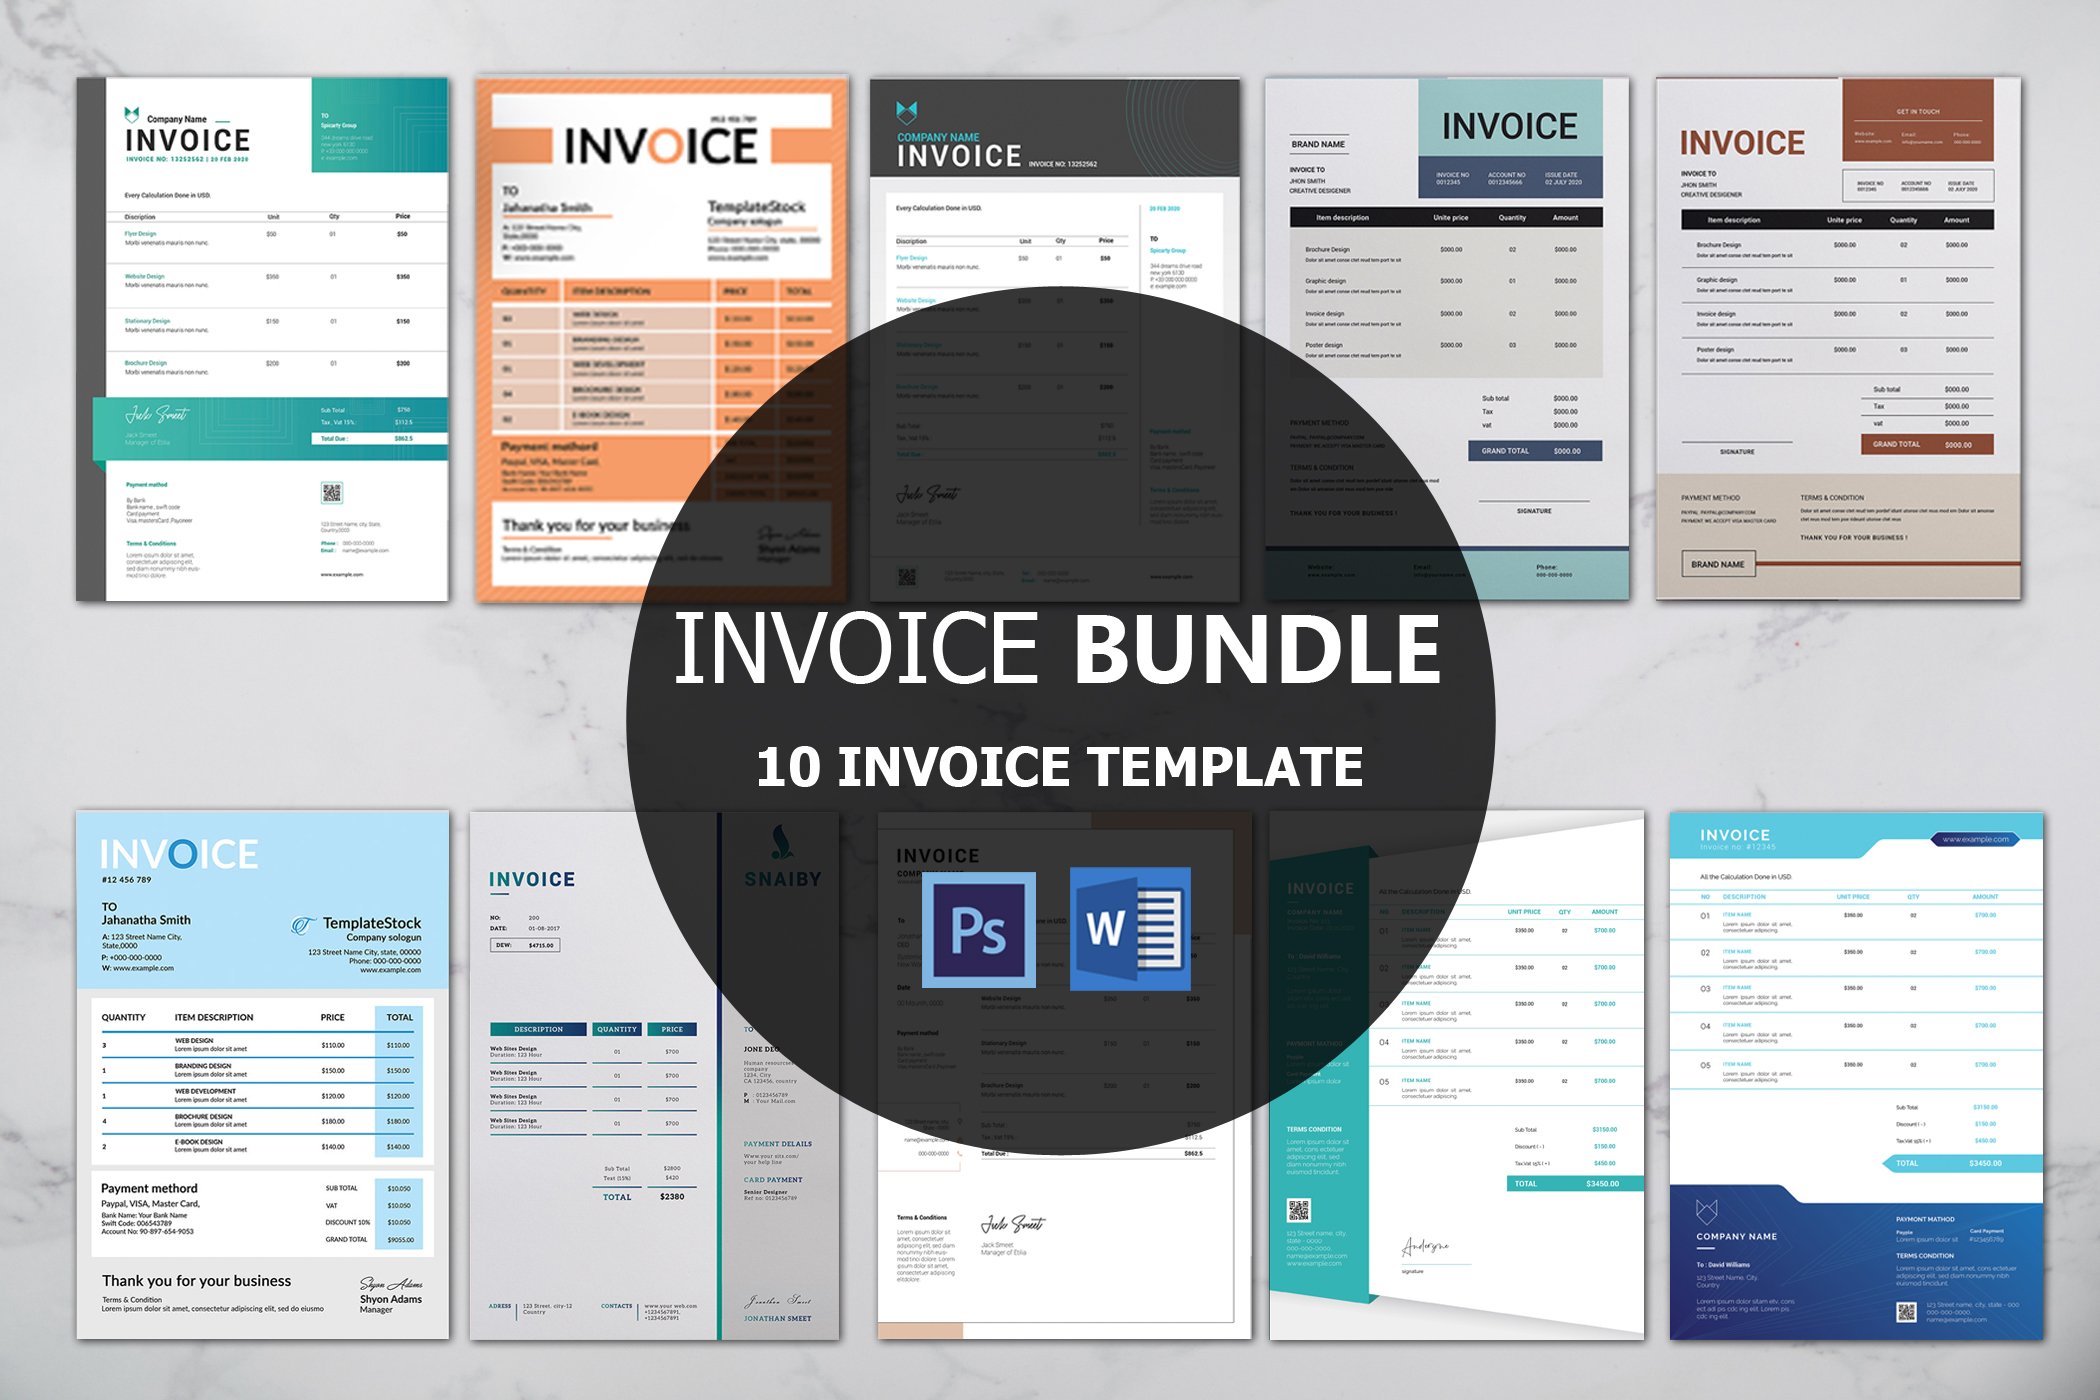 Invoice Template Bundle cover image.